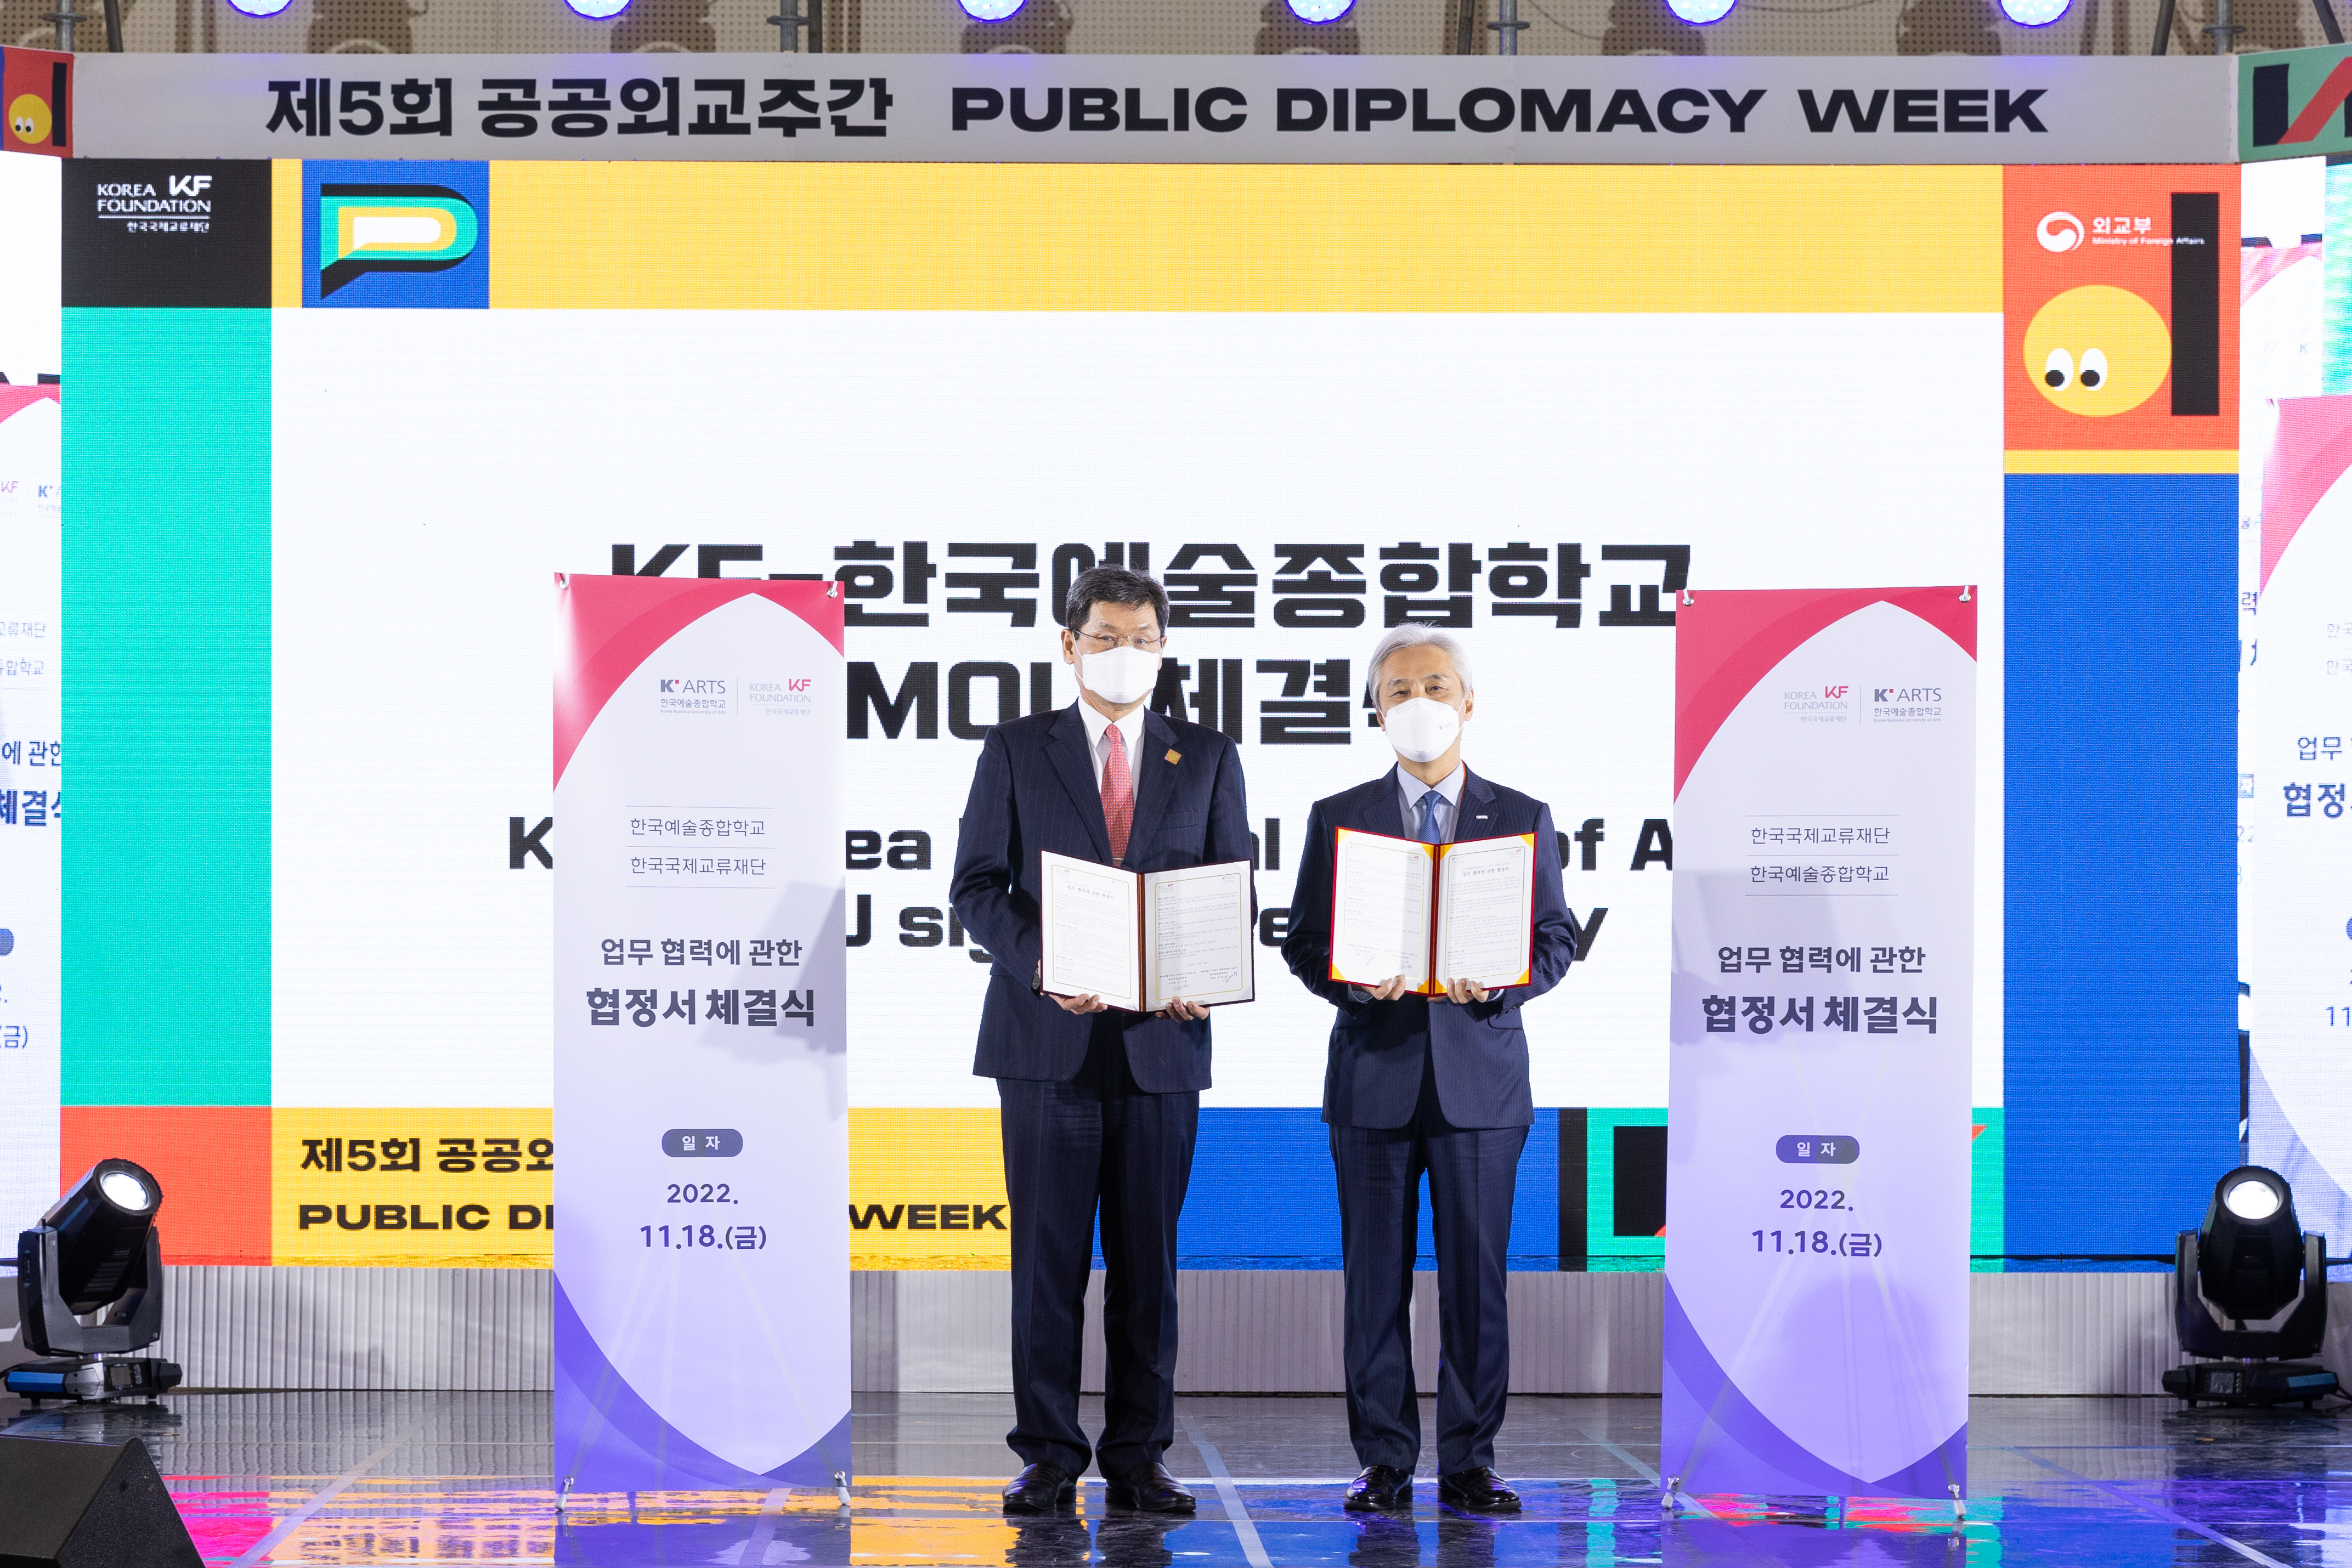 5th Public Diplomacy Week: Participation, the Future and Public Diplomacy 